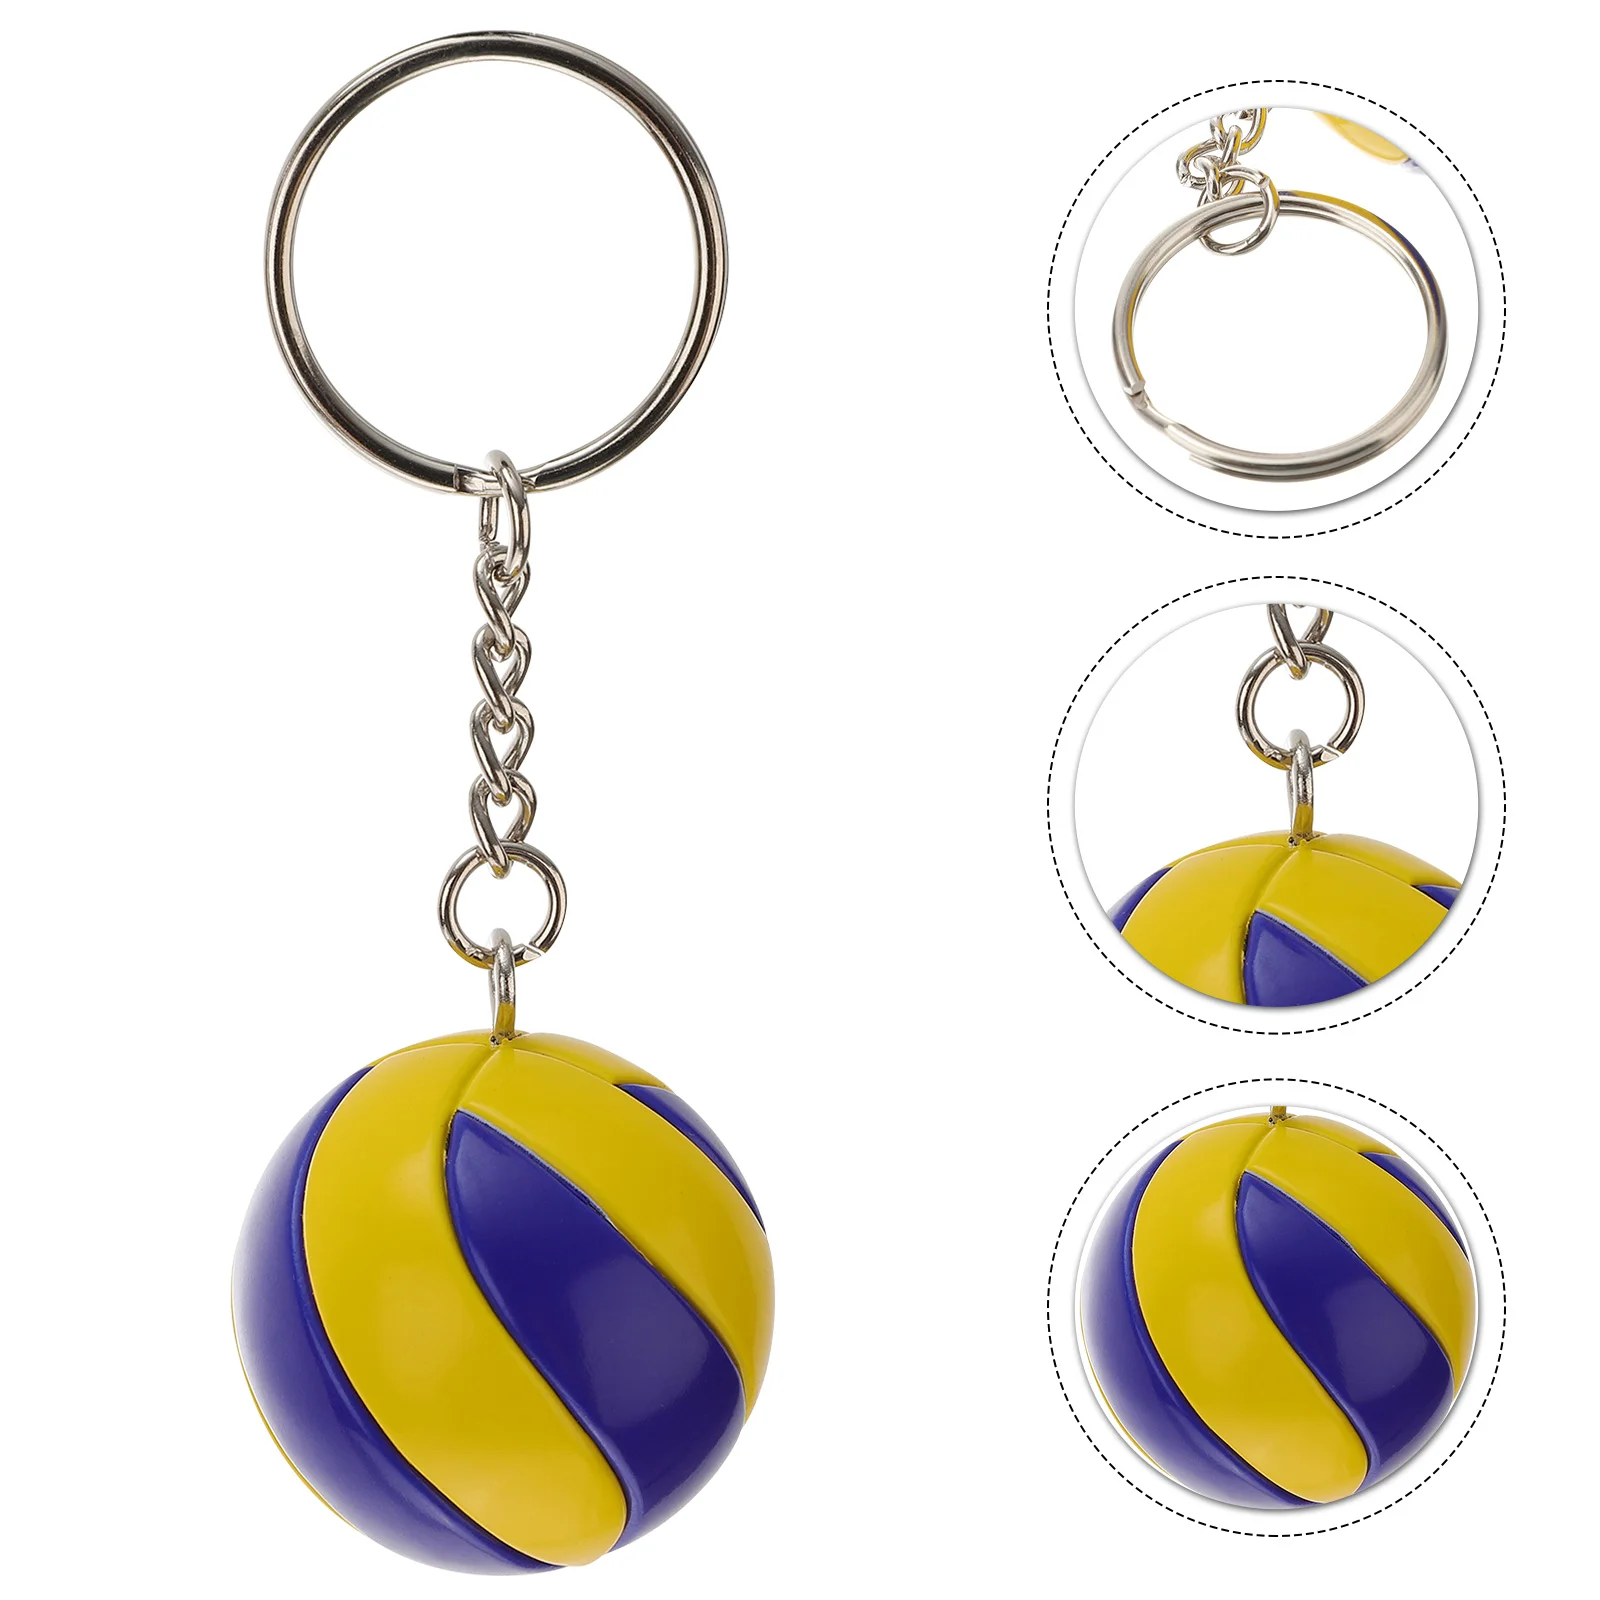 

Keychain Volleyball Sportskeychains Keyvolleybal Backpack Keyring Chain Party Pendants Gift Basketball Fan Gifts Favors Charm